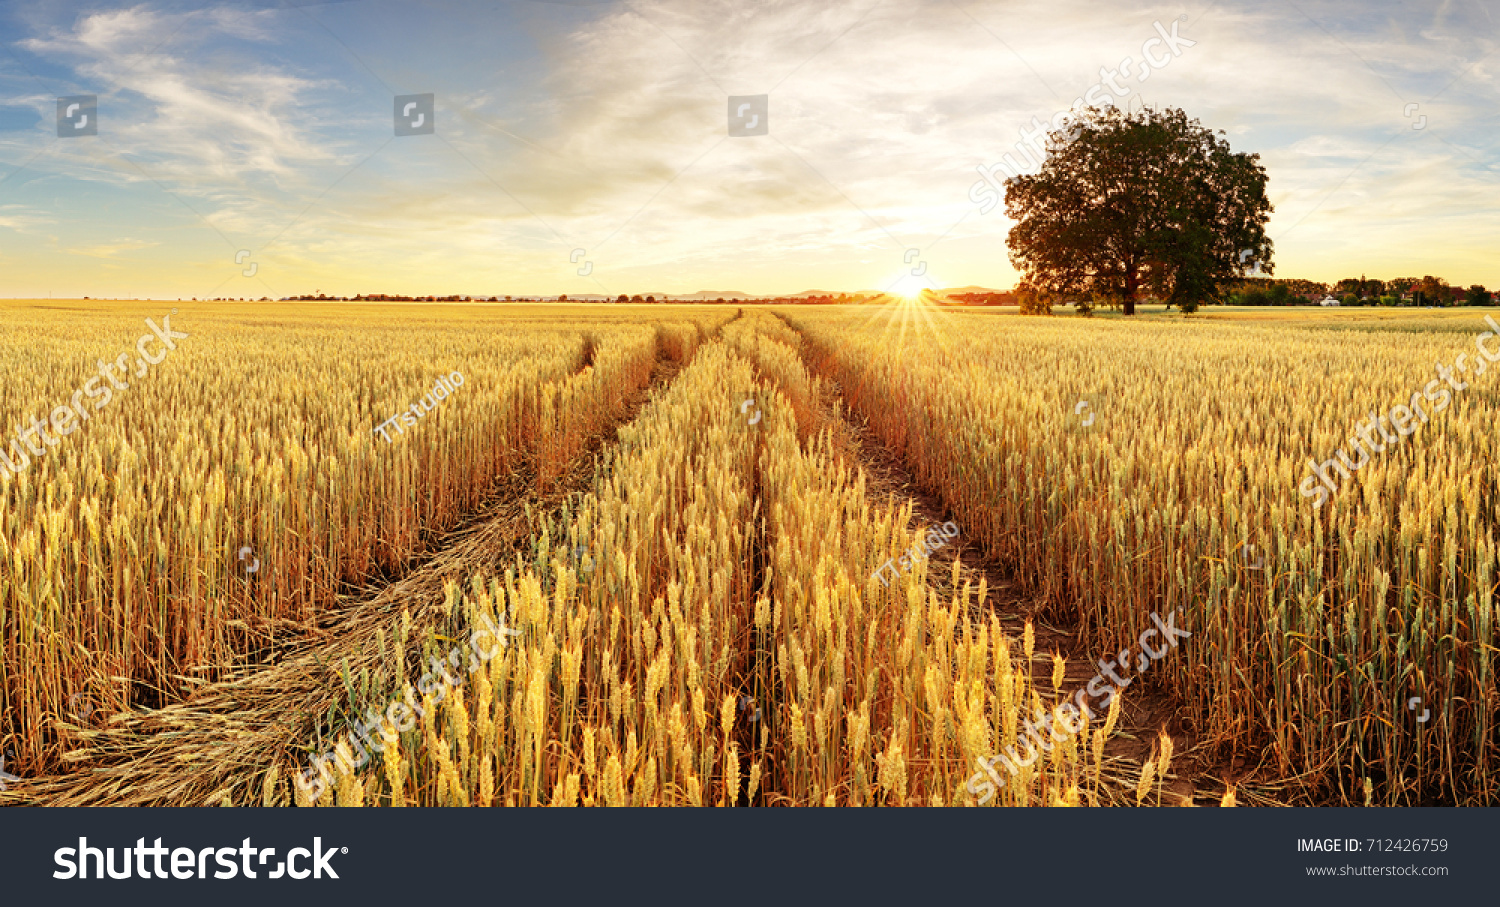 Tree and wheat field #712426759